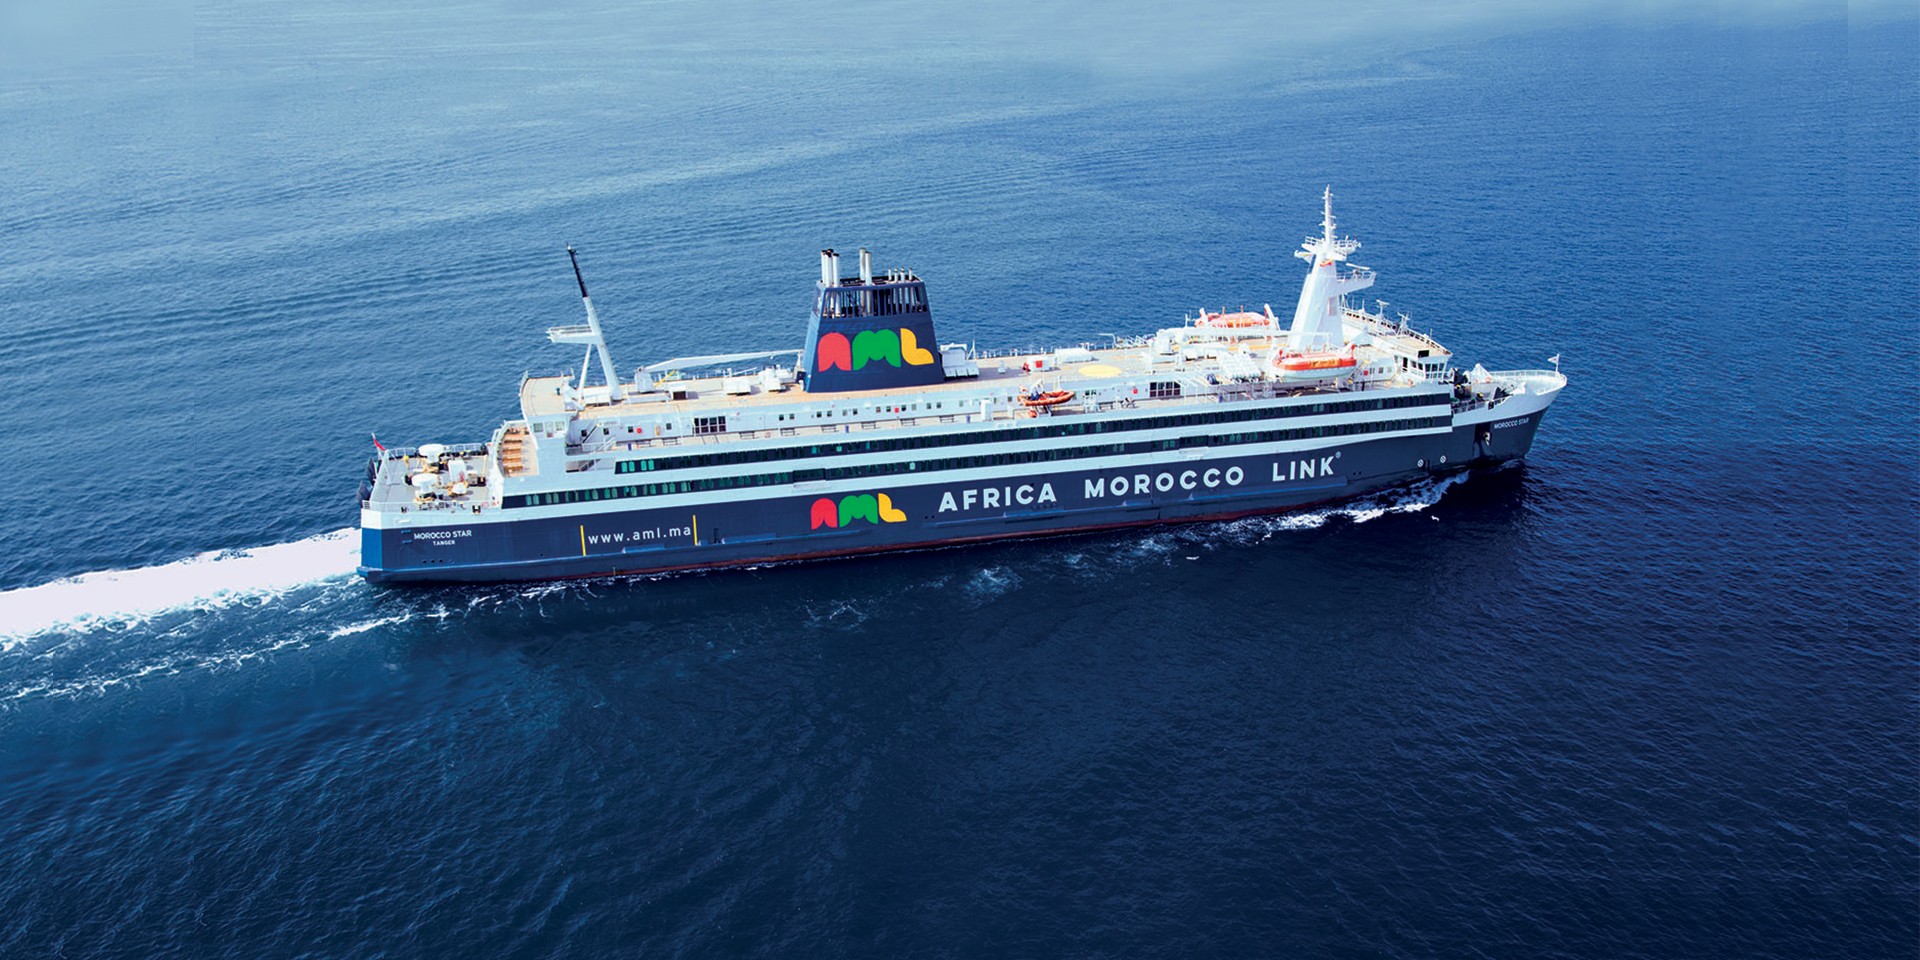 Africa Morocco Link: ferry booking, timetables and prices 2020 | NetFerry